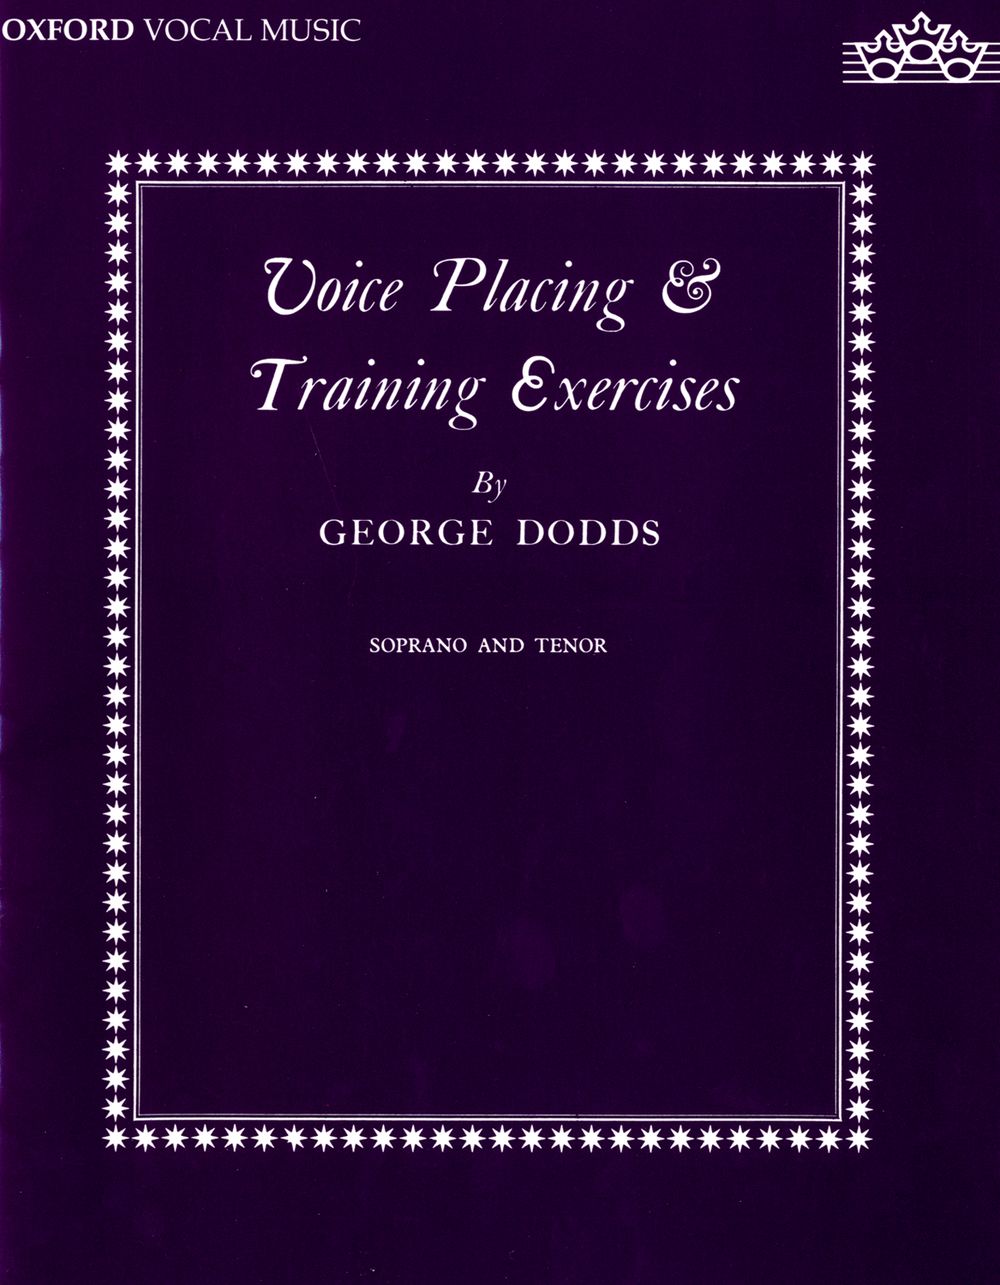 Dodds Voice Placing & Training Exercises Sop/tenor Sheet Music Songbook